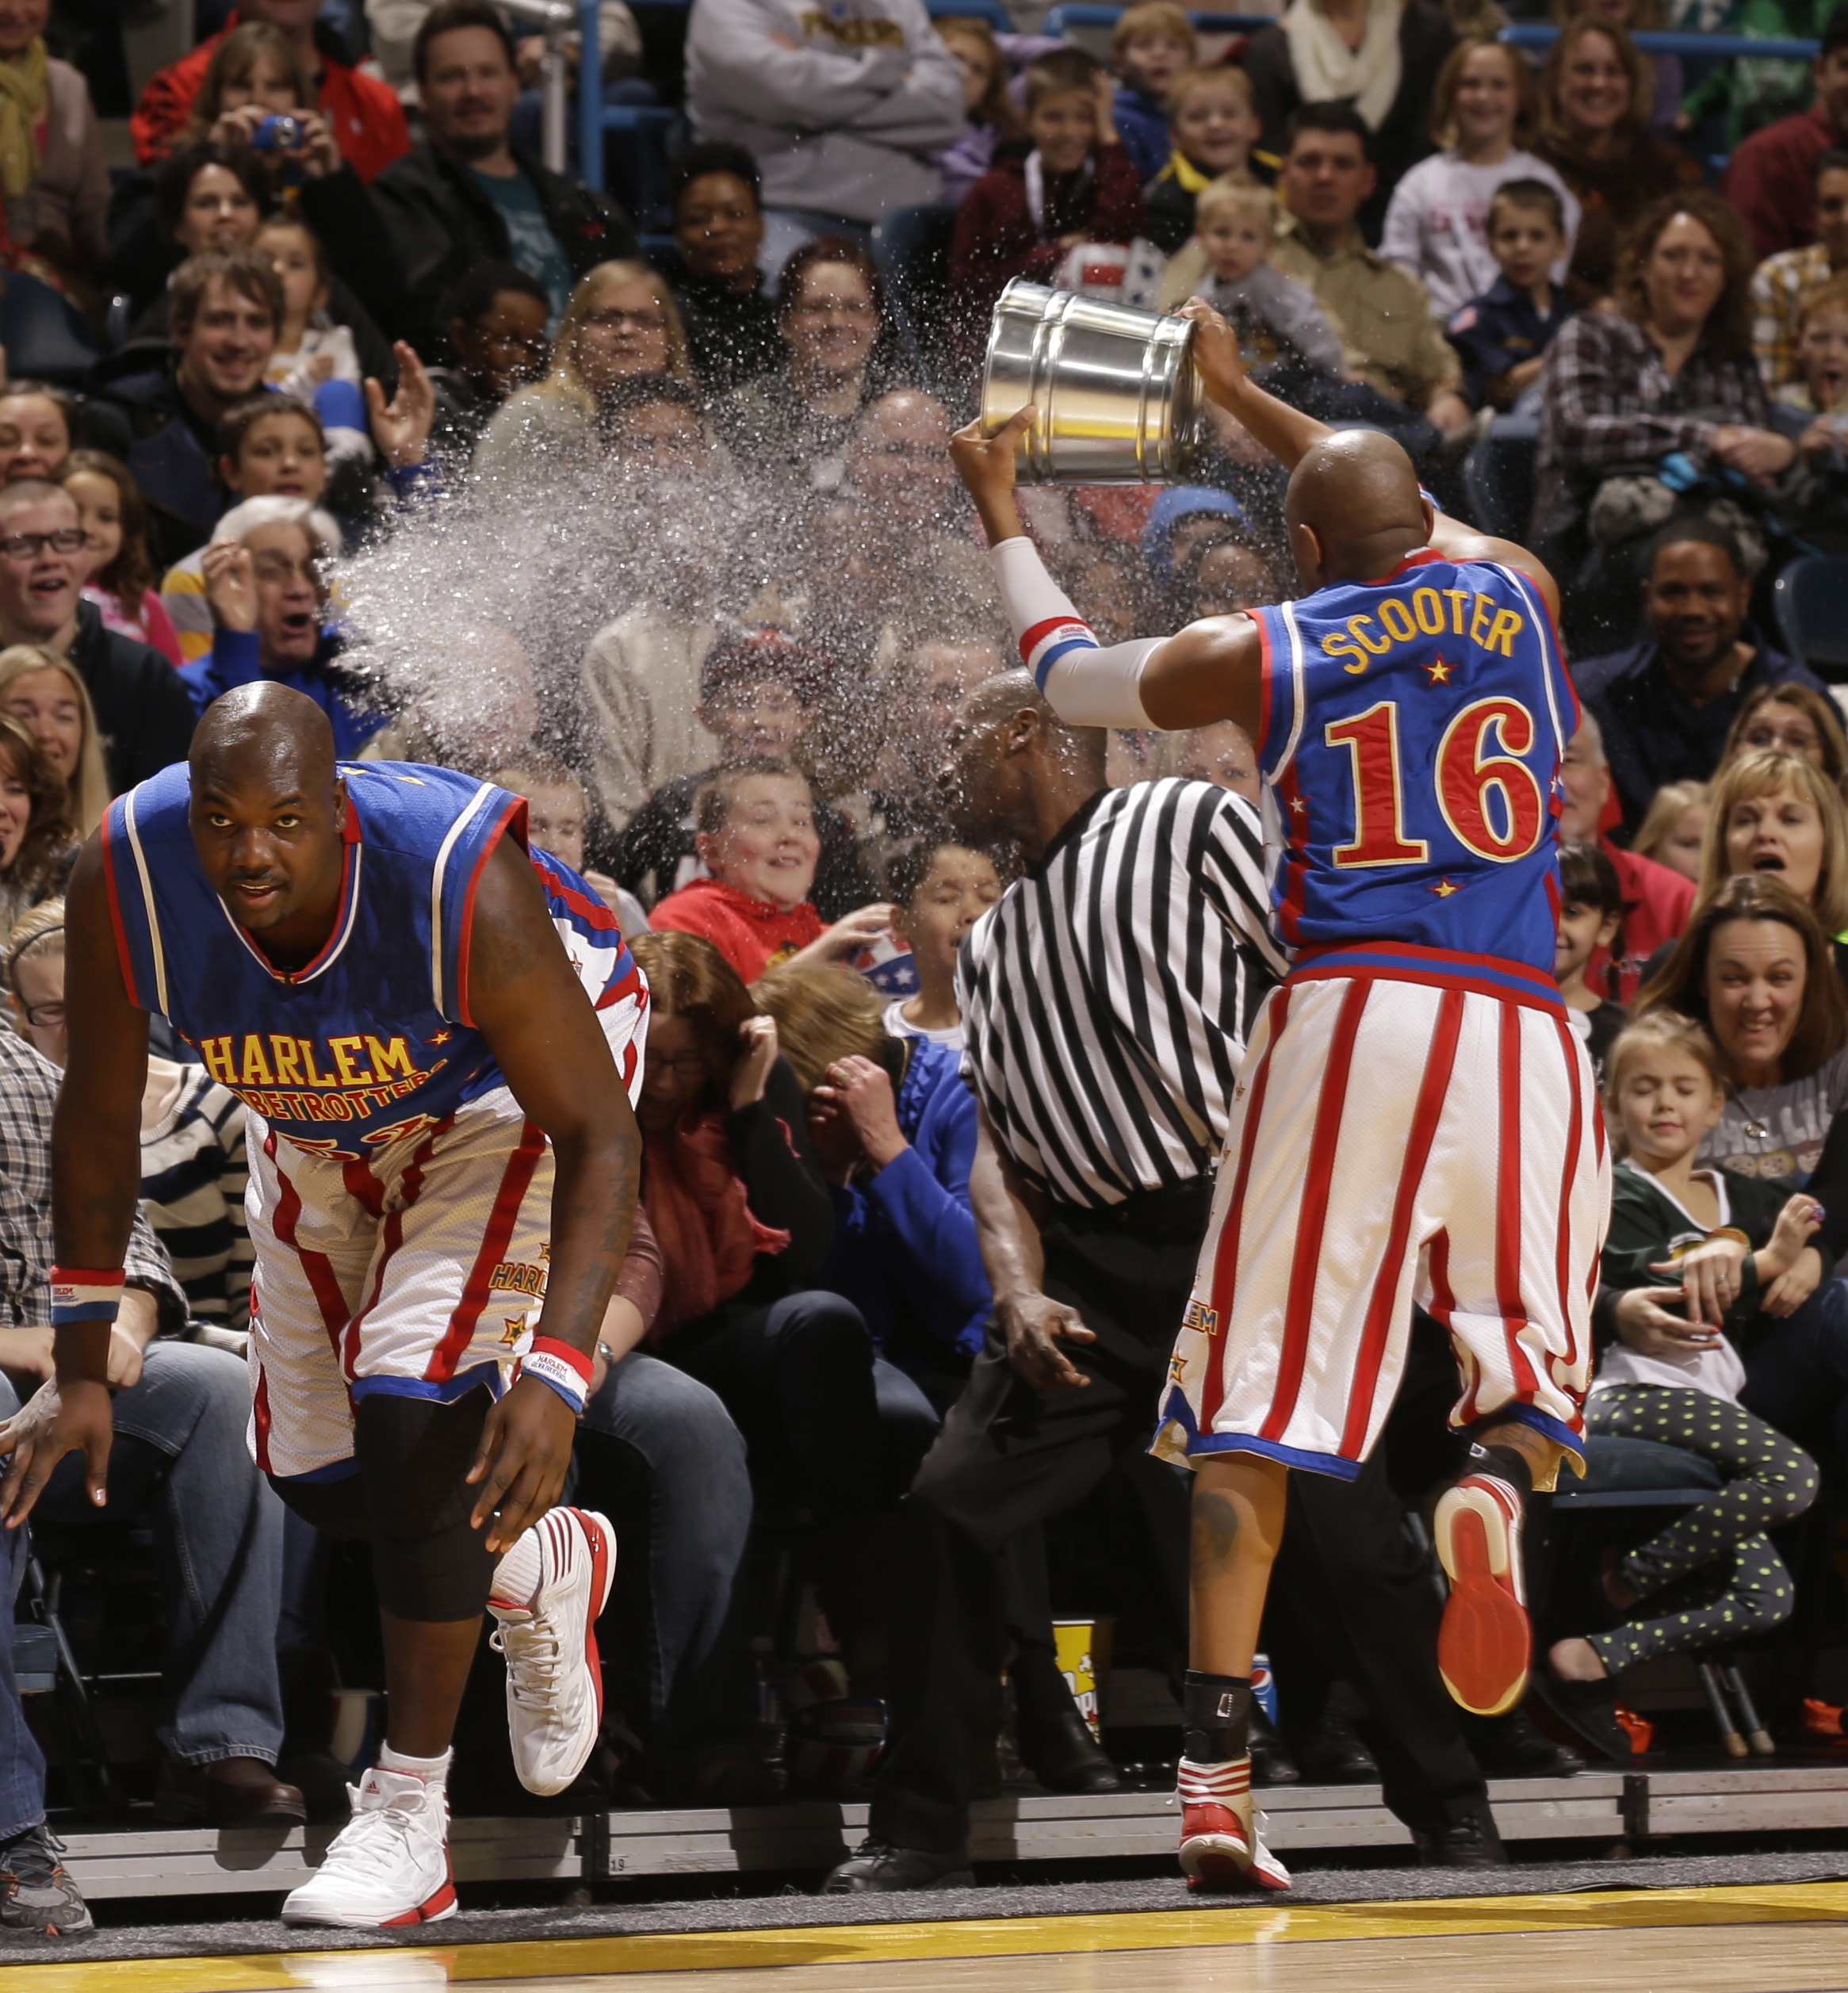 Giveaway – Harlem Globetrotters Tickets and Discount Code